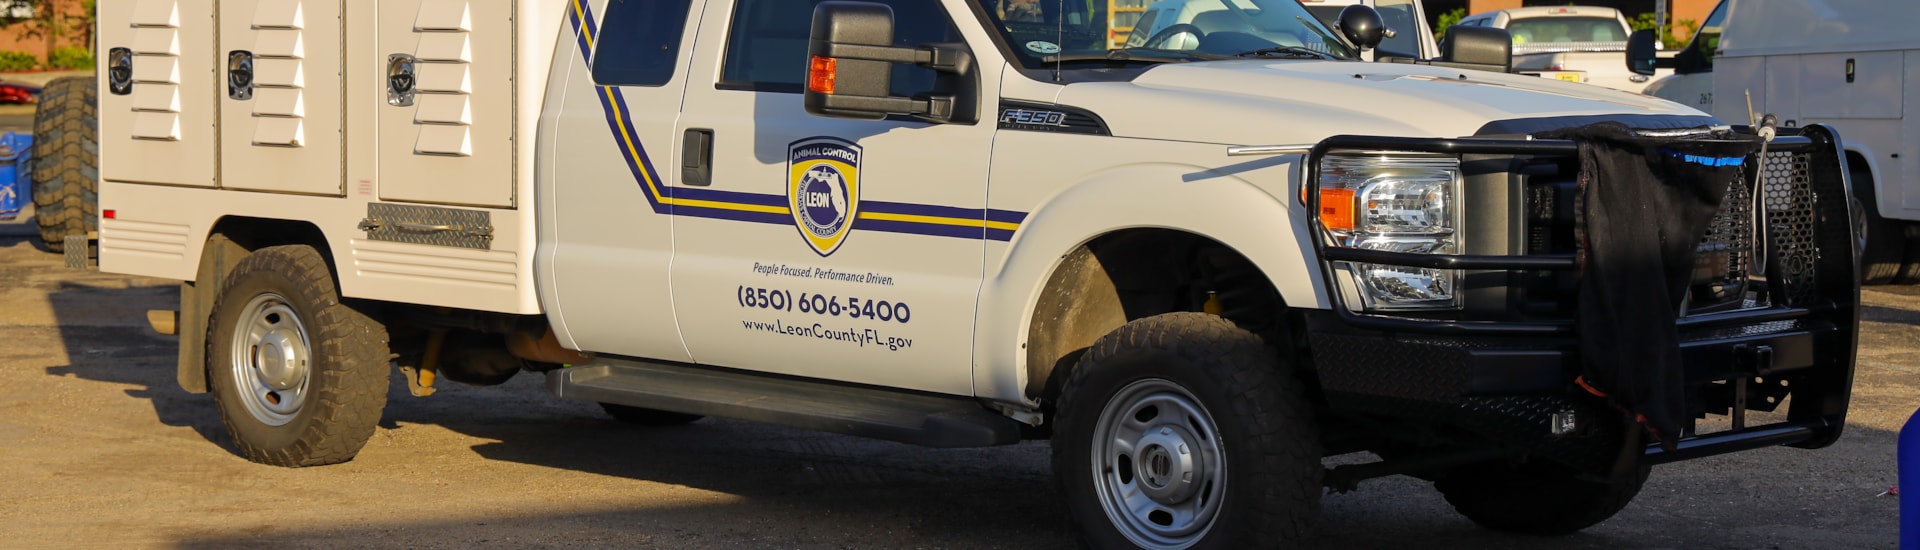 A Leon County Animal Control pick up truck